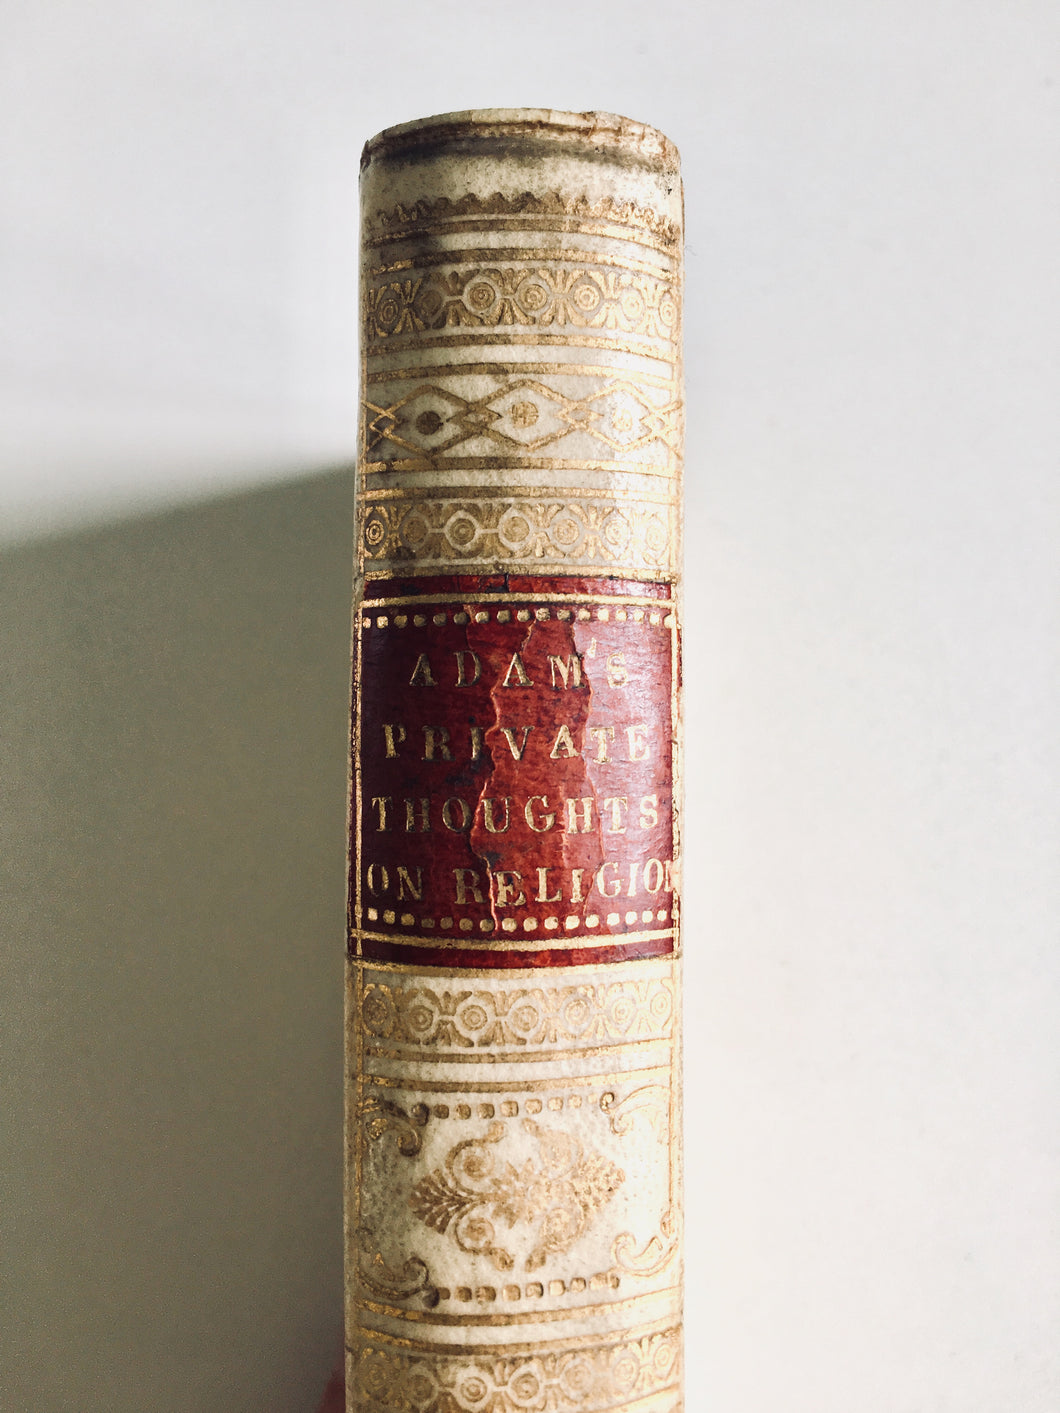 1823 THOMAS ADAM. Private Thoughts on Religion. Devotional Classic Rec. by R. M. McCheyne